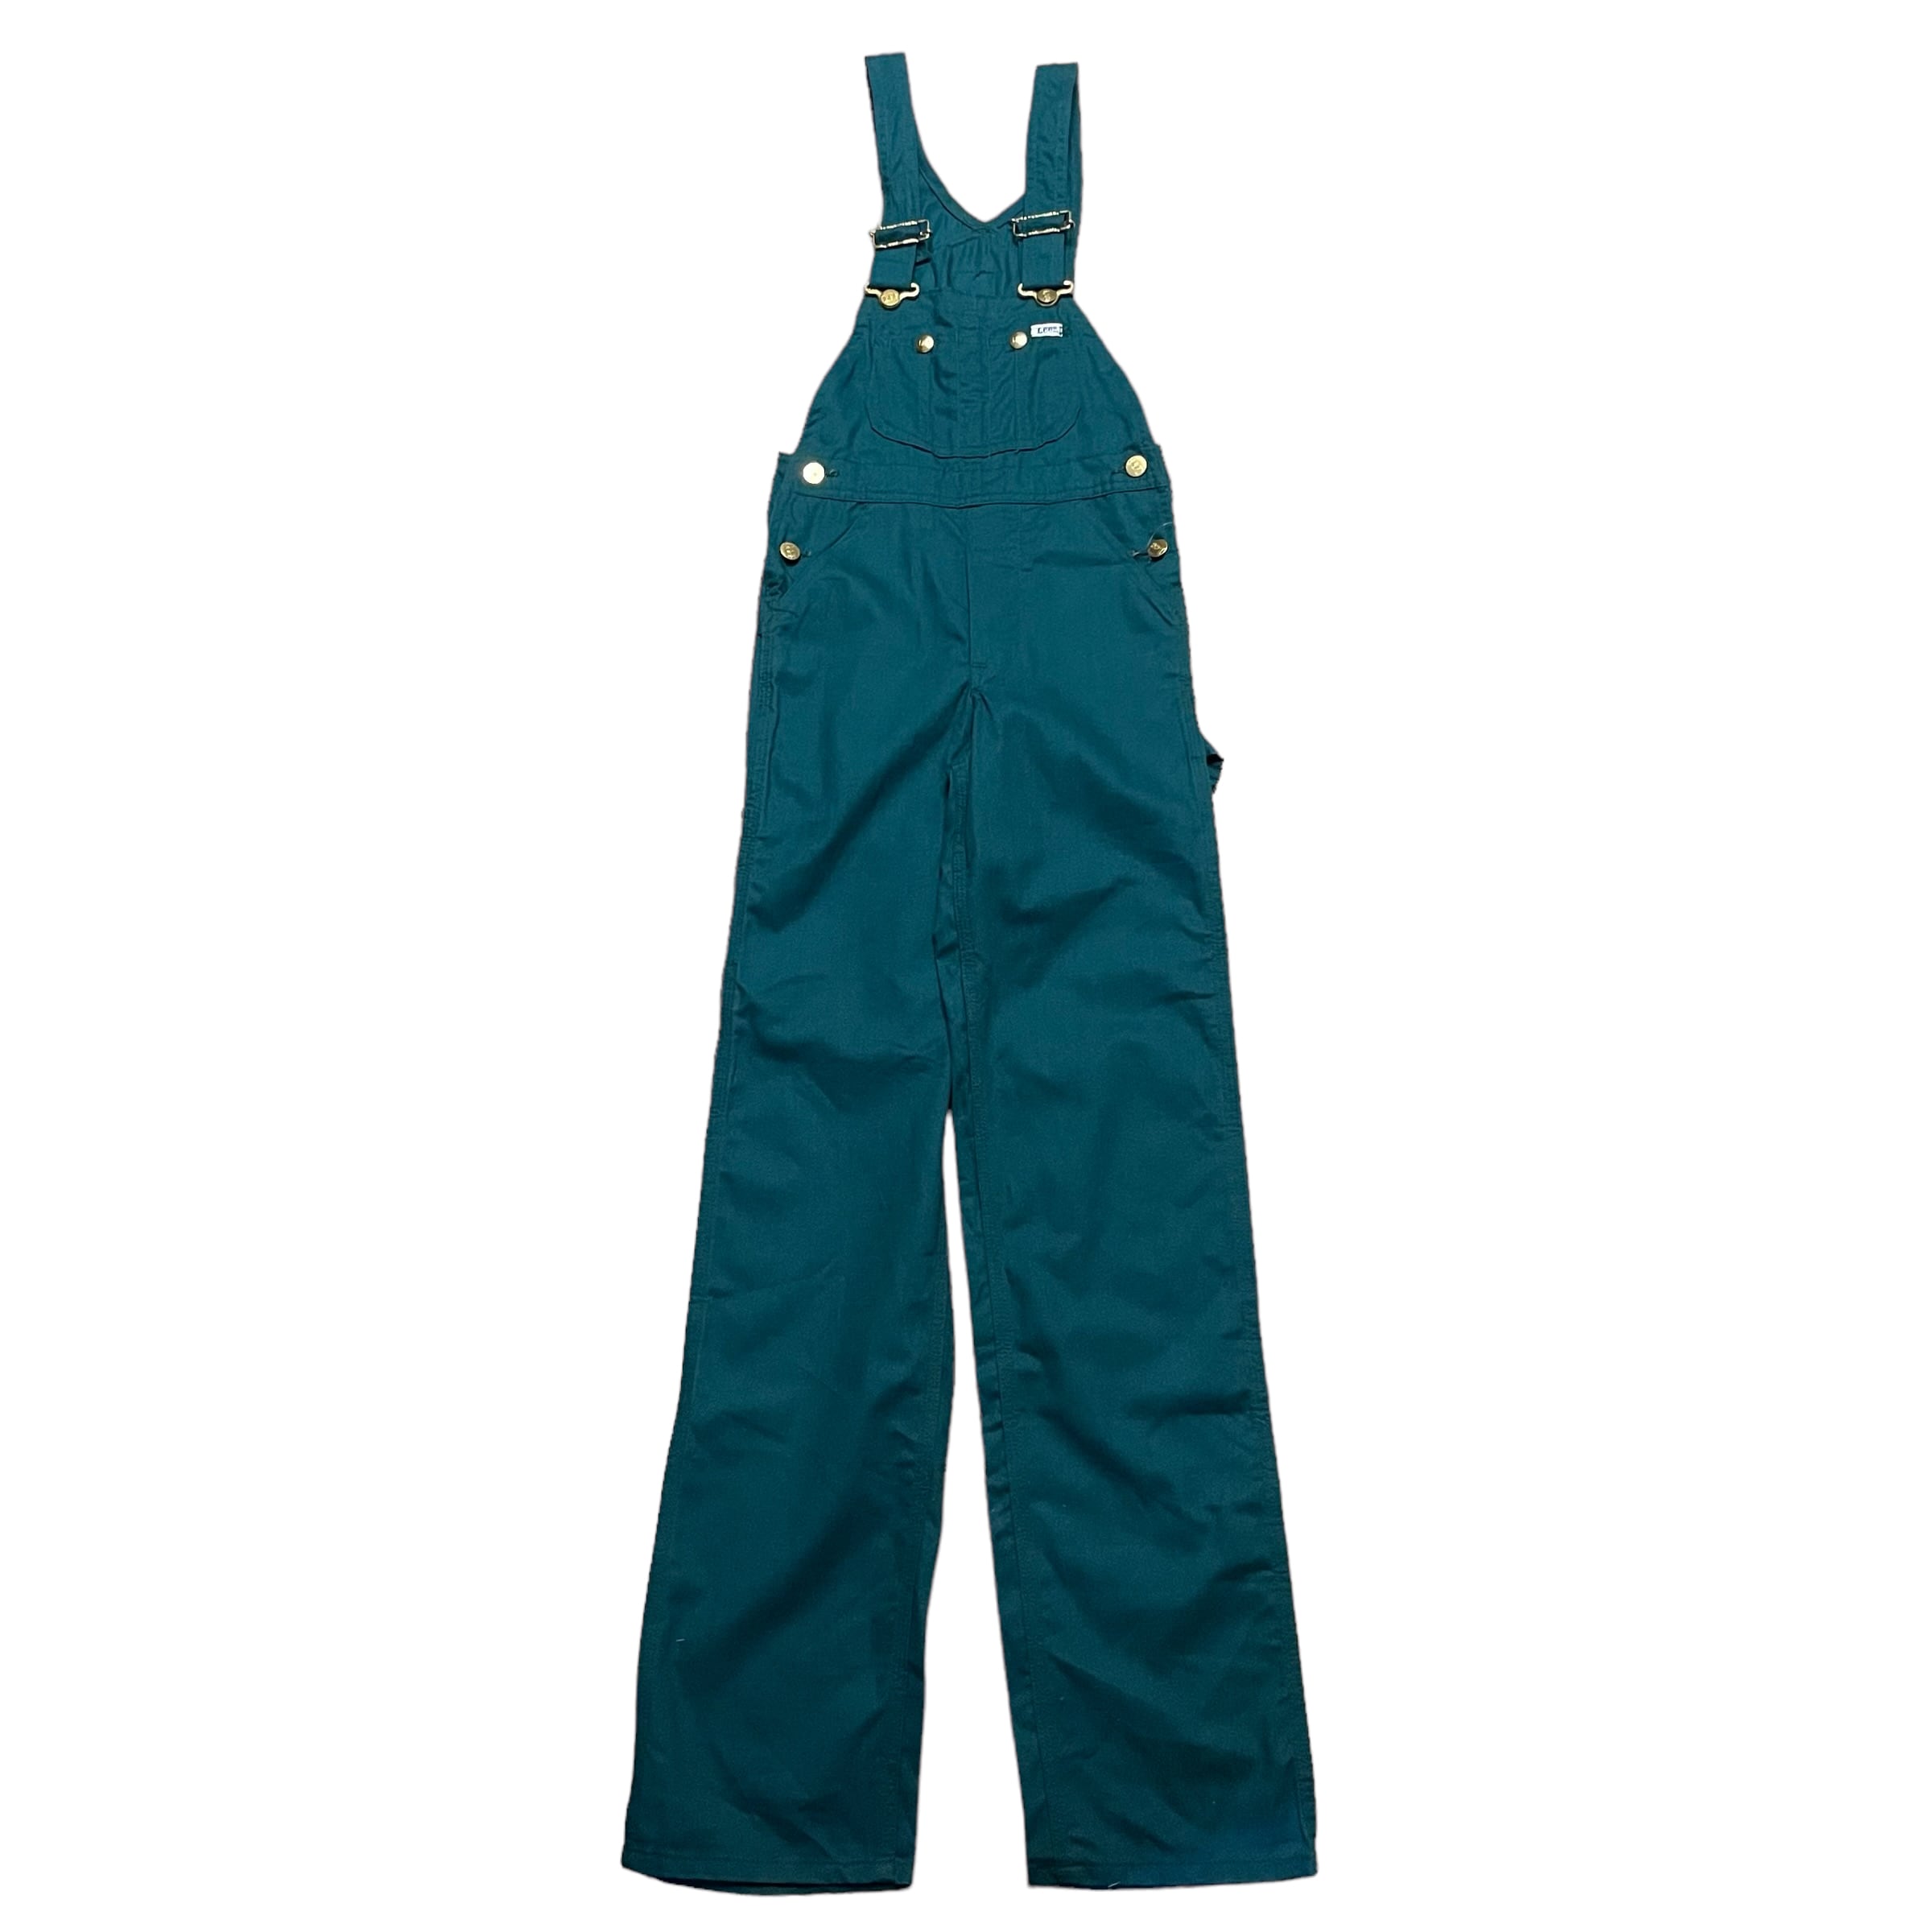 Dead stock 80's Lee Boys Dungaree&Overalls made in USA【W25 L32】